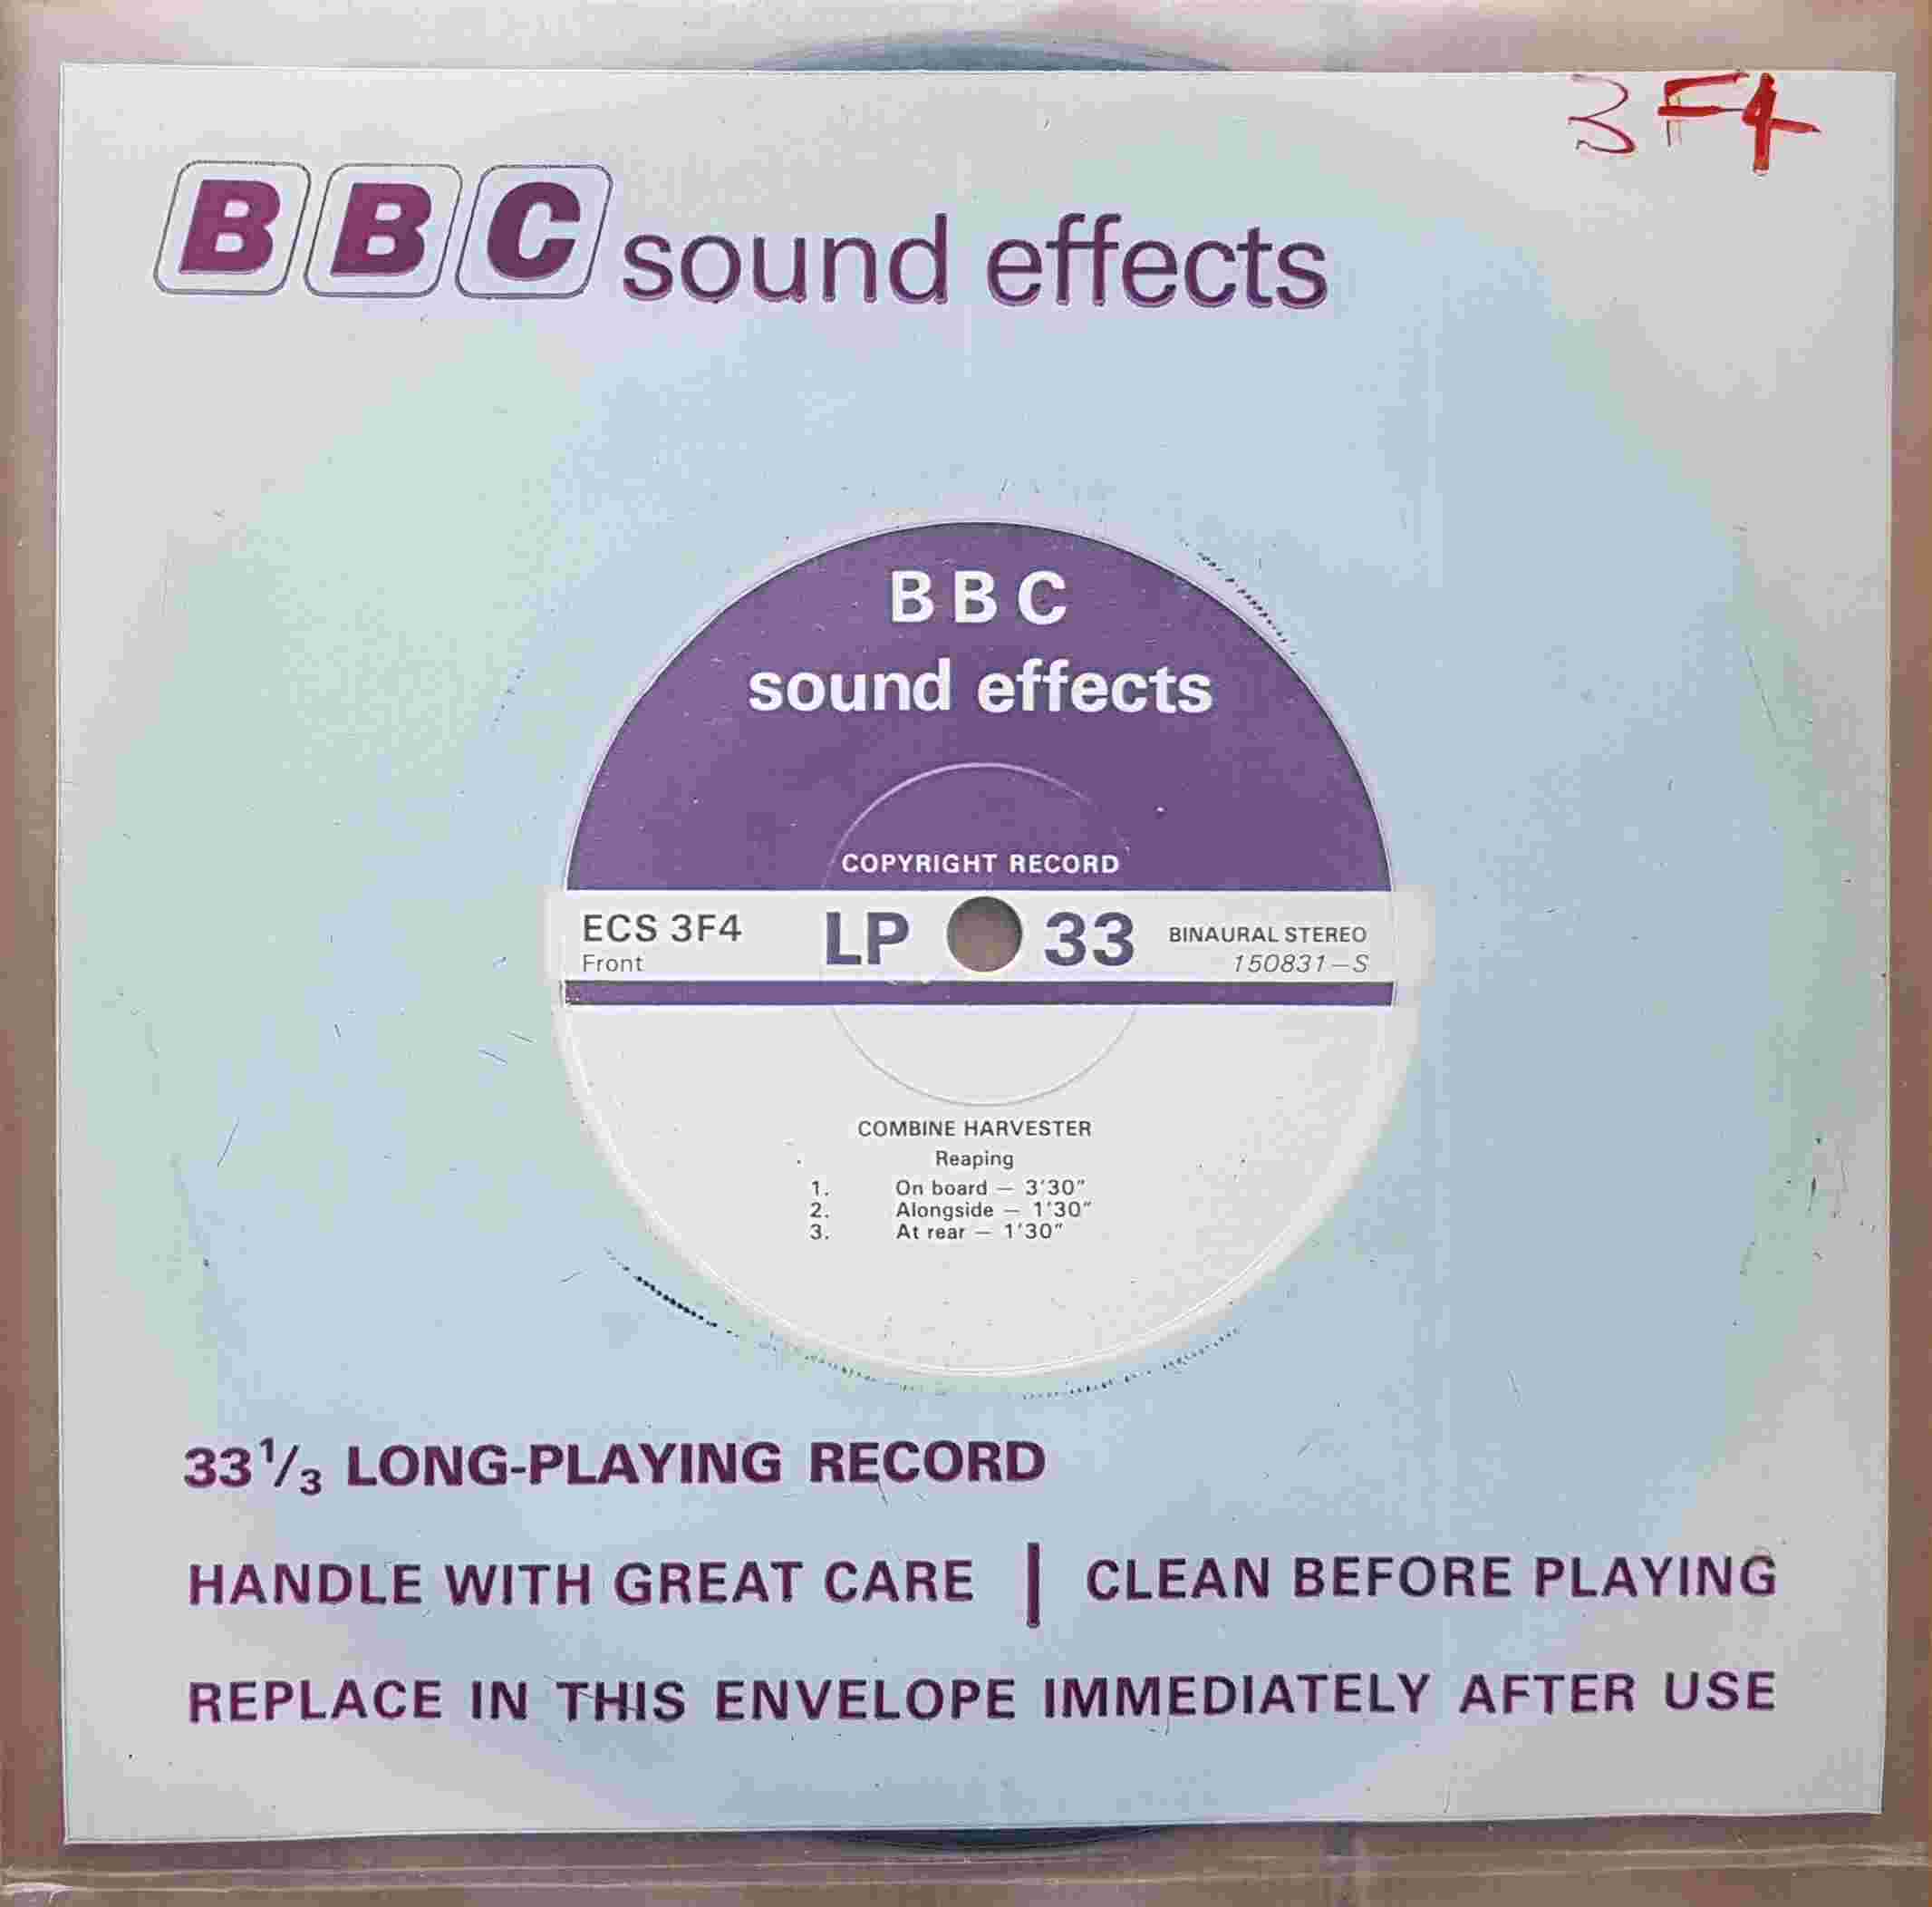 Picture of ECS 3F4 Combine harvester by artist Not registered from the BBC singles - Records and Tapes library